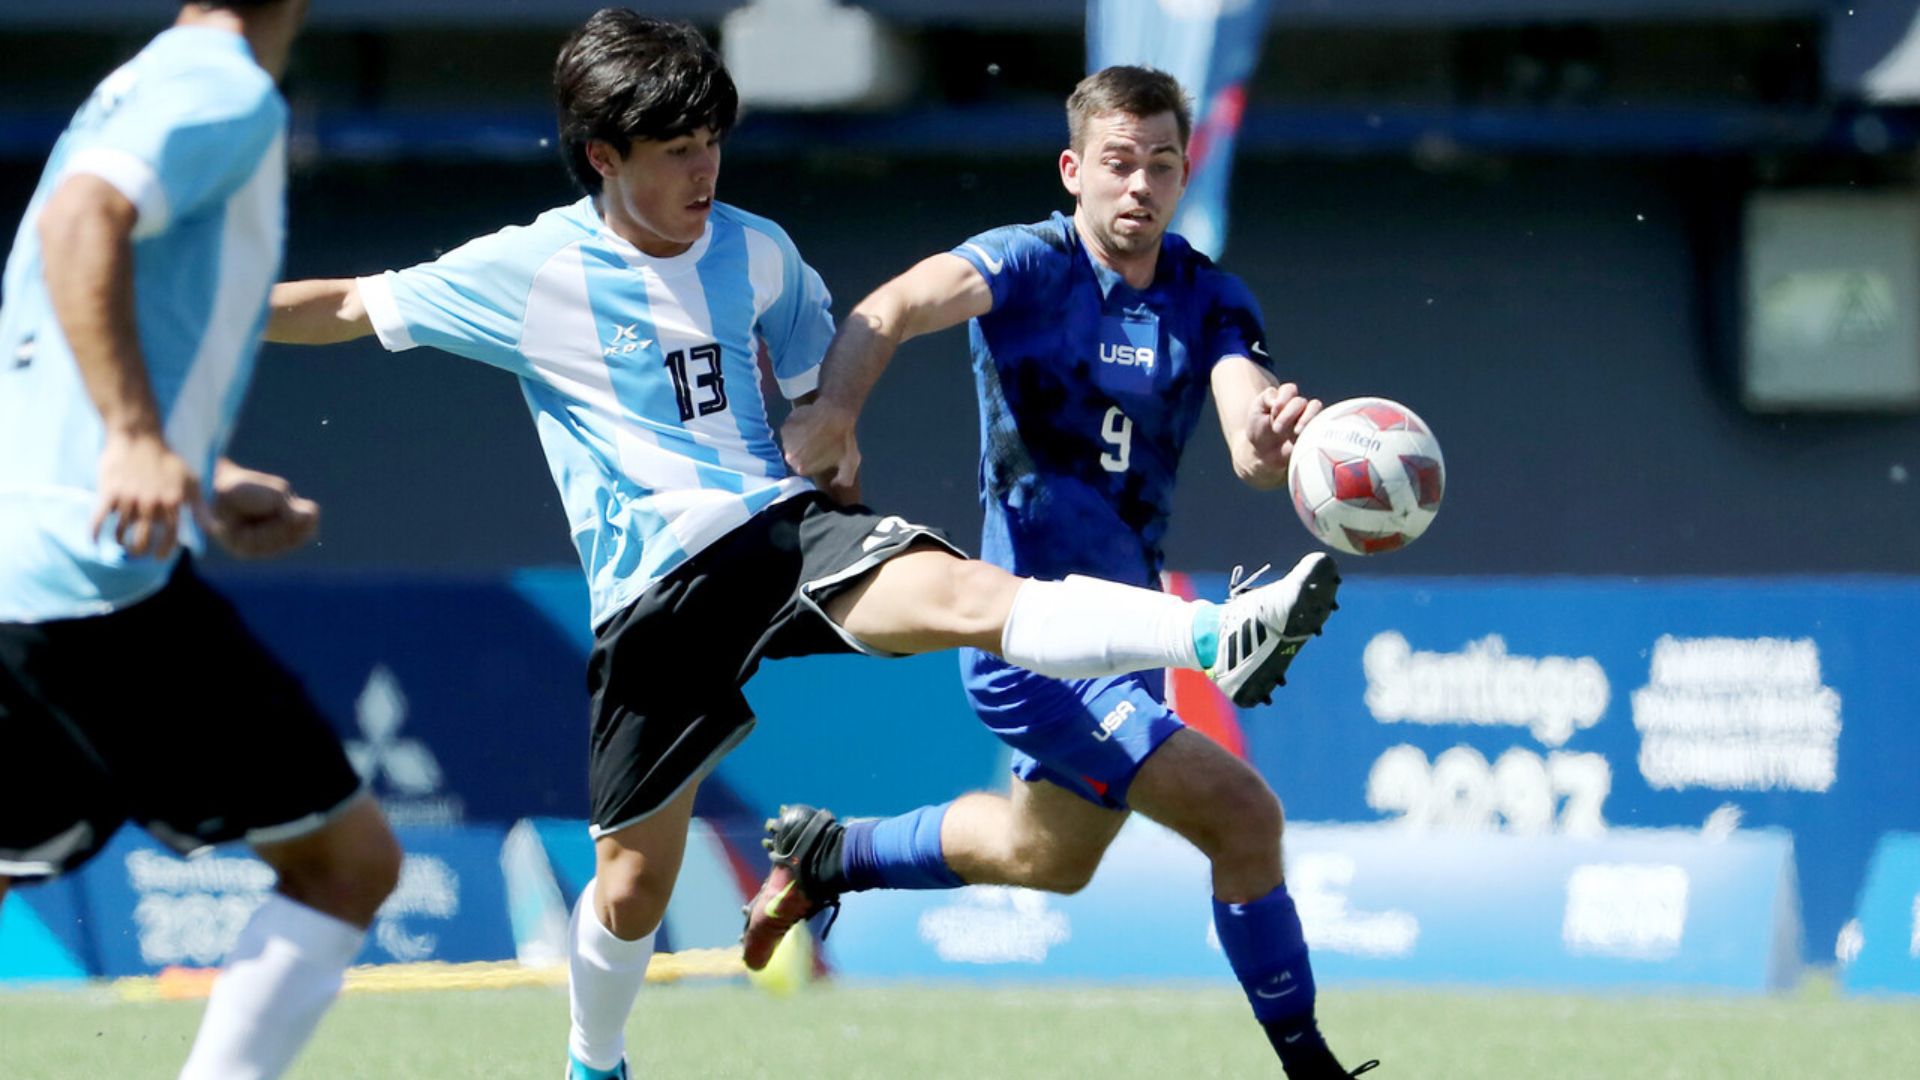 CP Football: Argentina Secures First Victory and Ends USA's Undefeated Streak